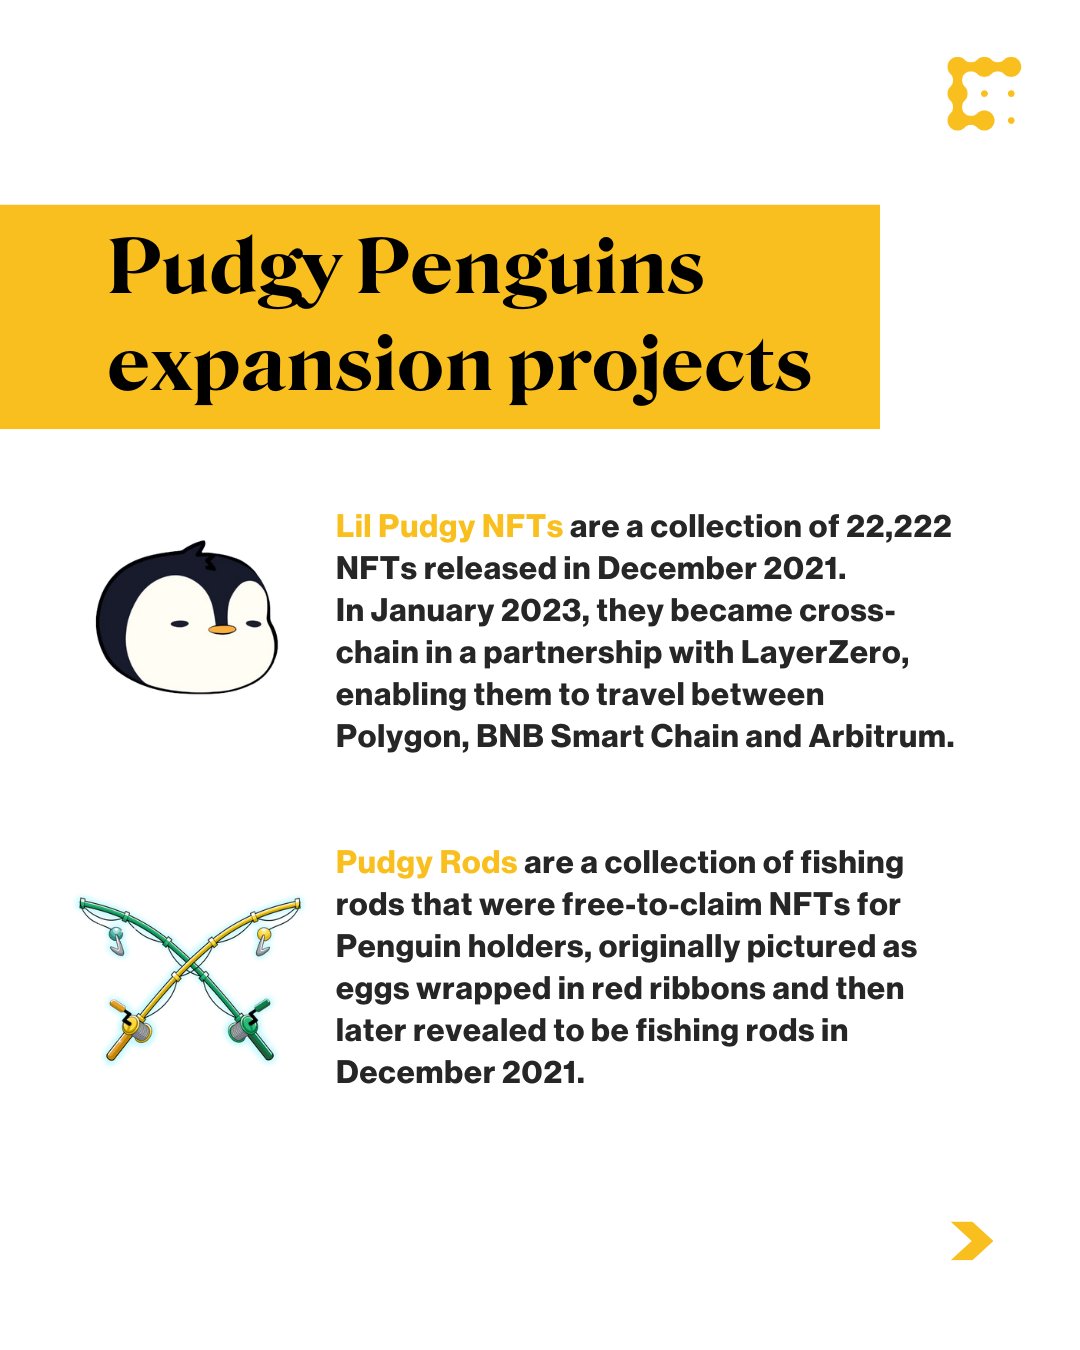 With the release of new Pudgy Toys and Pudgy World, the <a href=/nfts/pudgypenguins>@PudgyPenguins</a> team and communit...